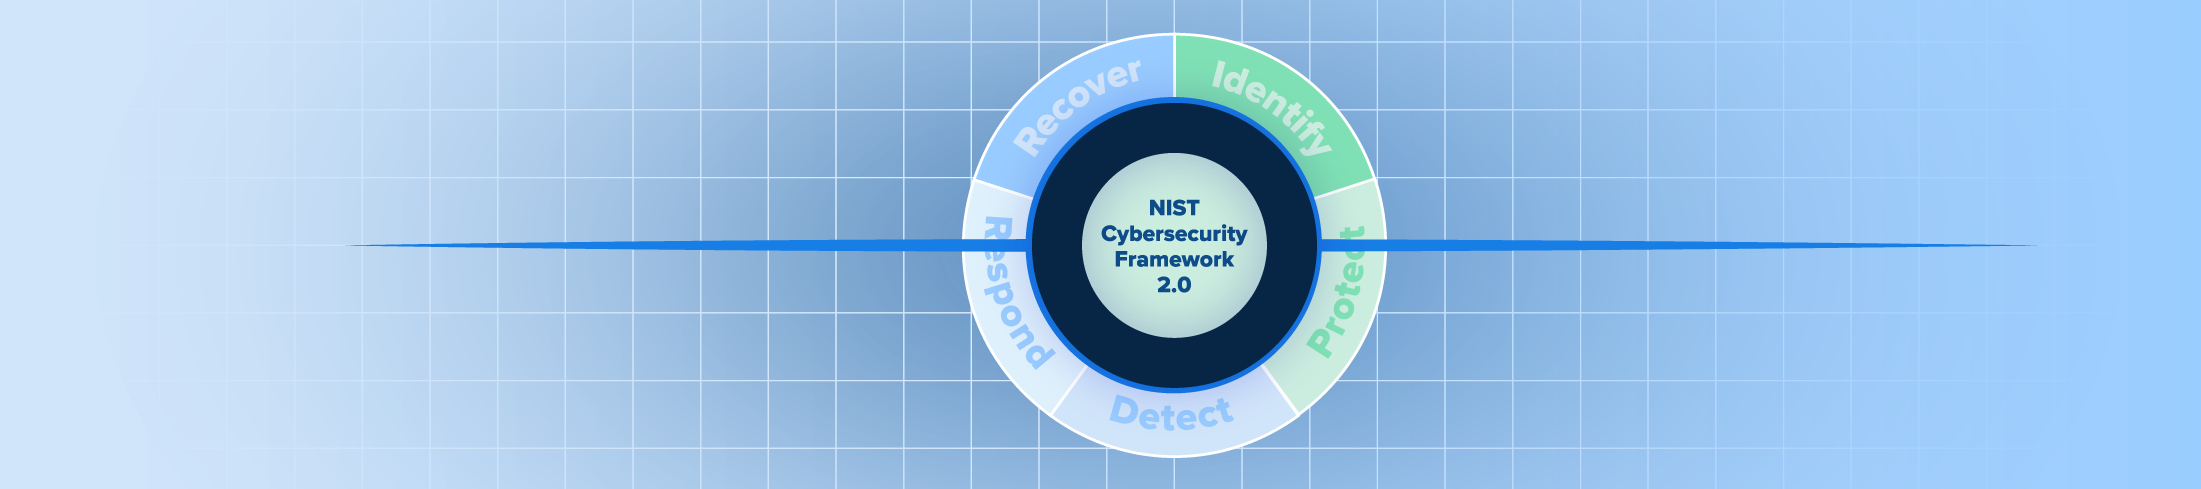 New NIST CSF 2.0 guidelines adds Governance to core functions